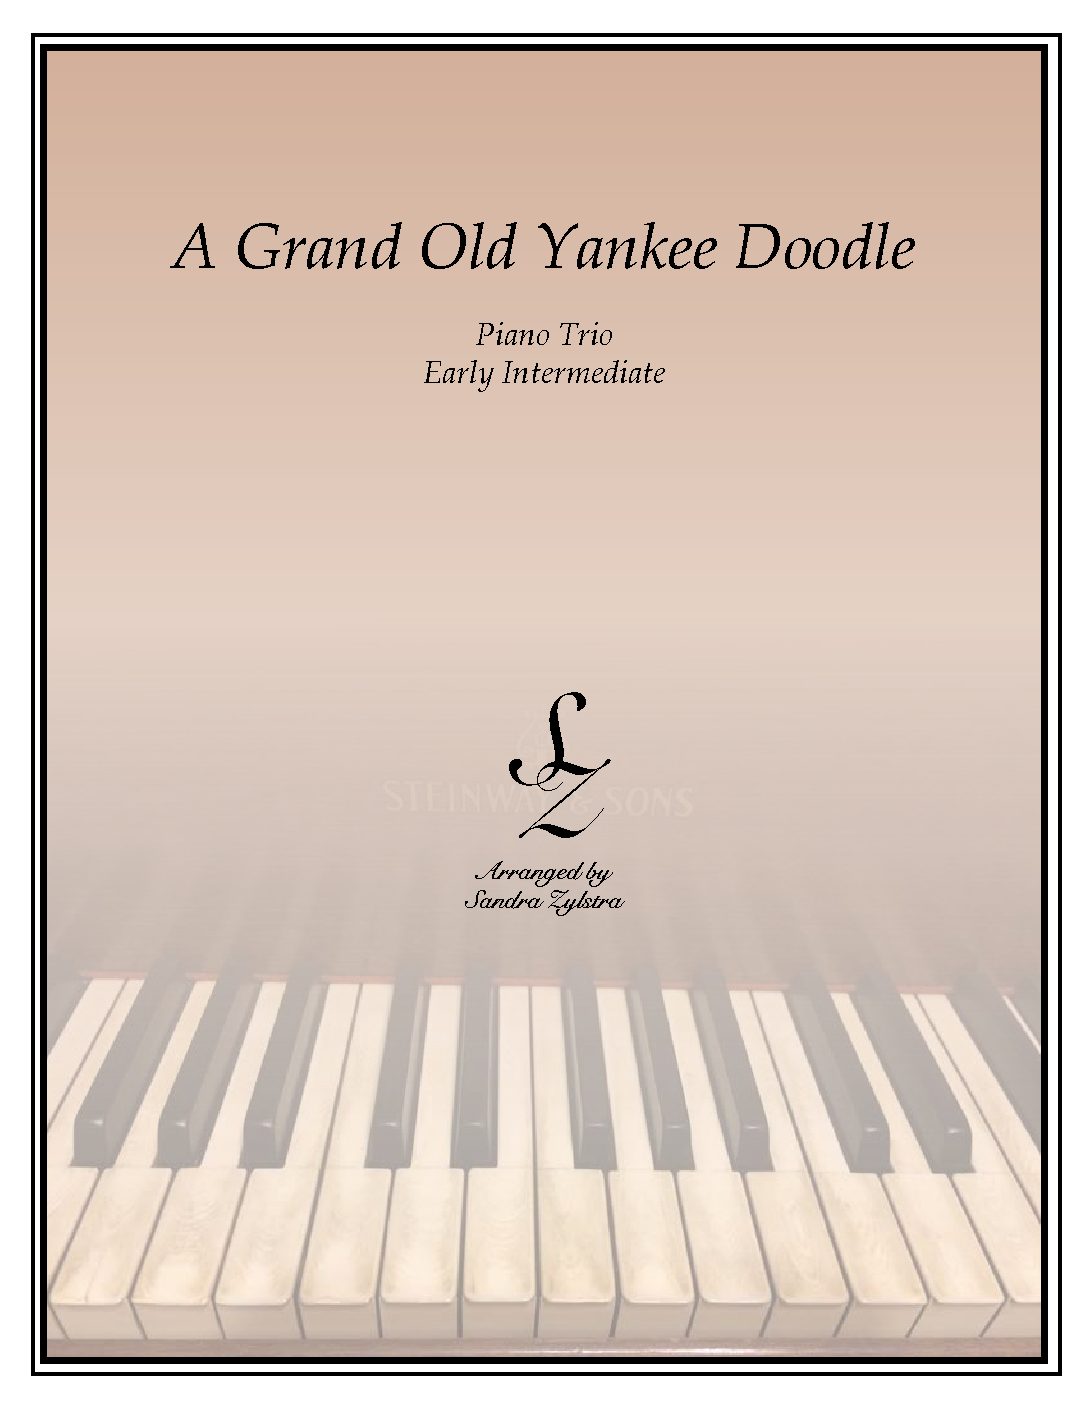 A Grand Old Yankee Doodle Piano Trio Sheet Music Marketplace